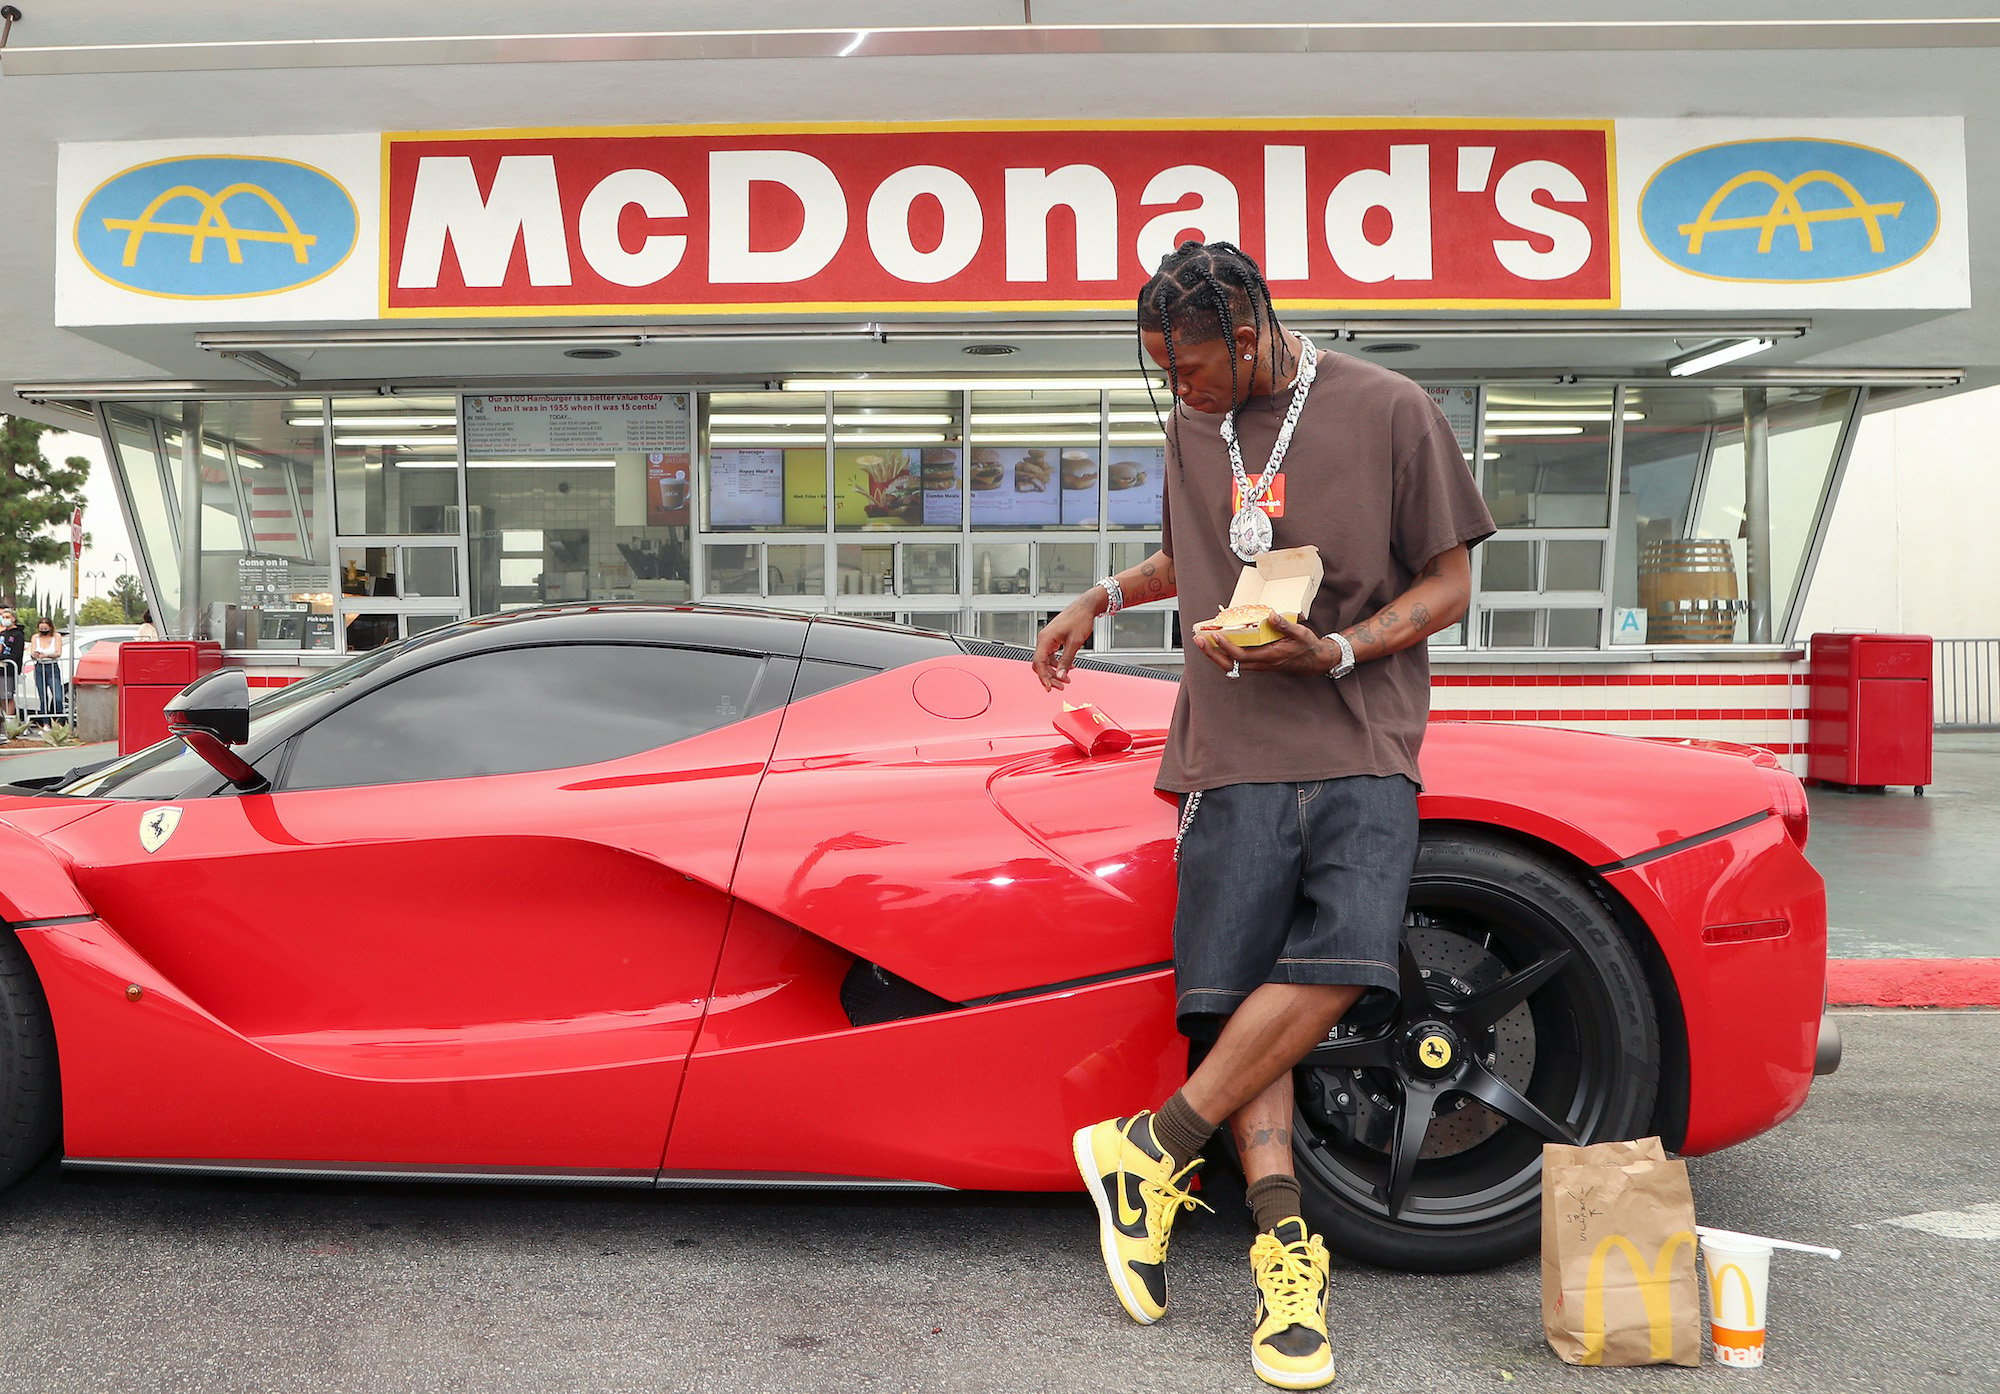 Travis Scott leaning against a red car parked in front of a McDonald's